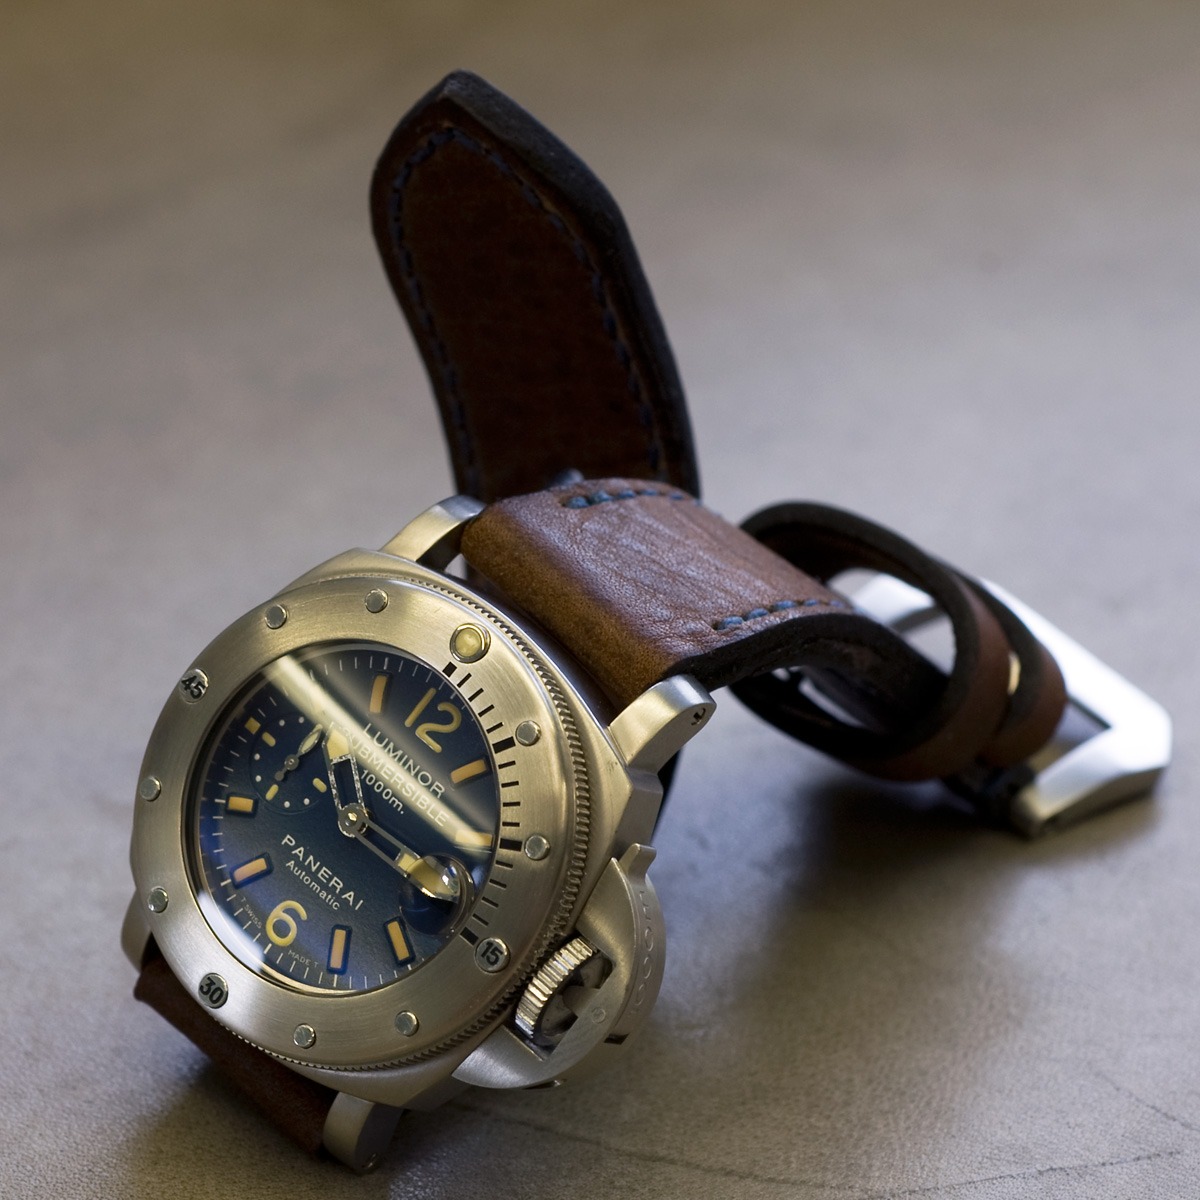 Panerai 87 on Horween Nut Brown leather with royal blue stitching. © Richard Beard